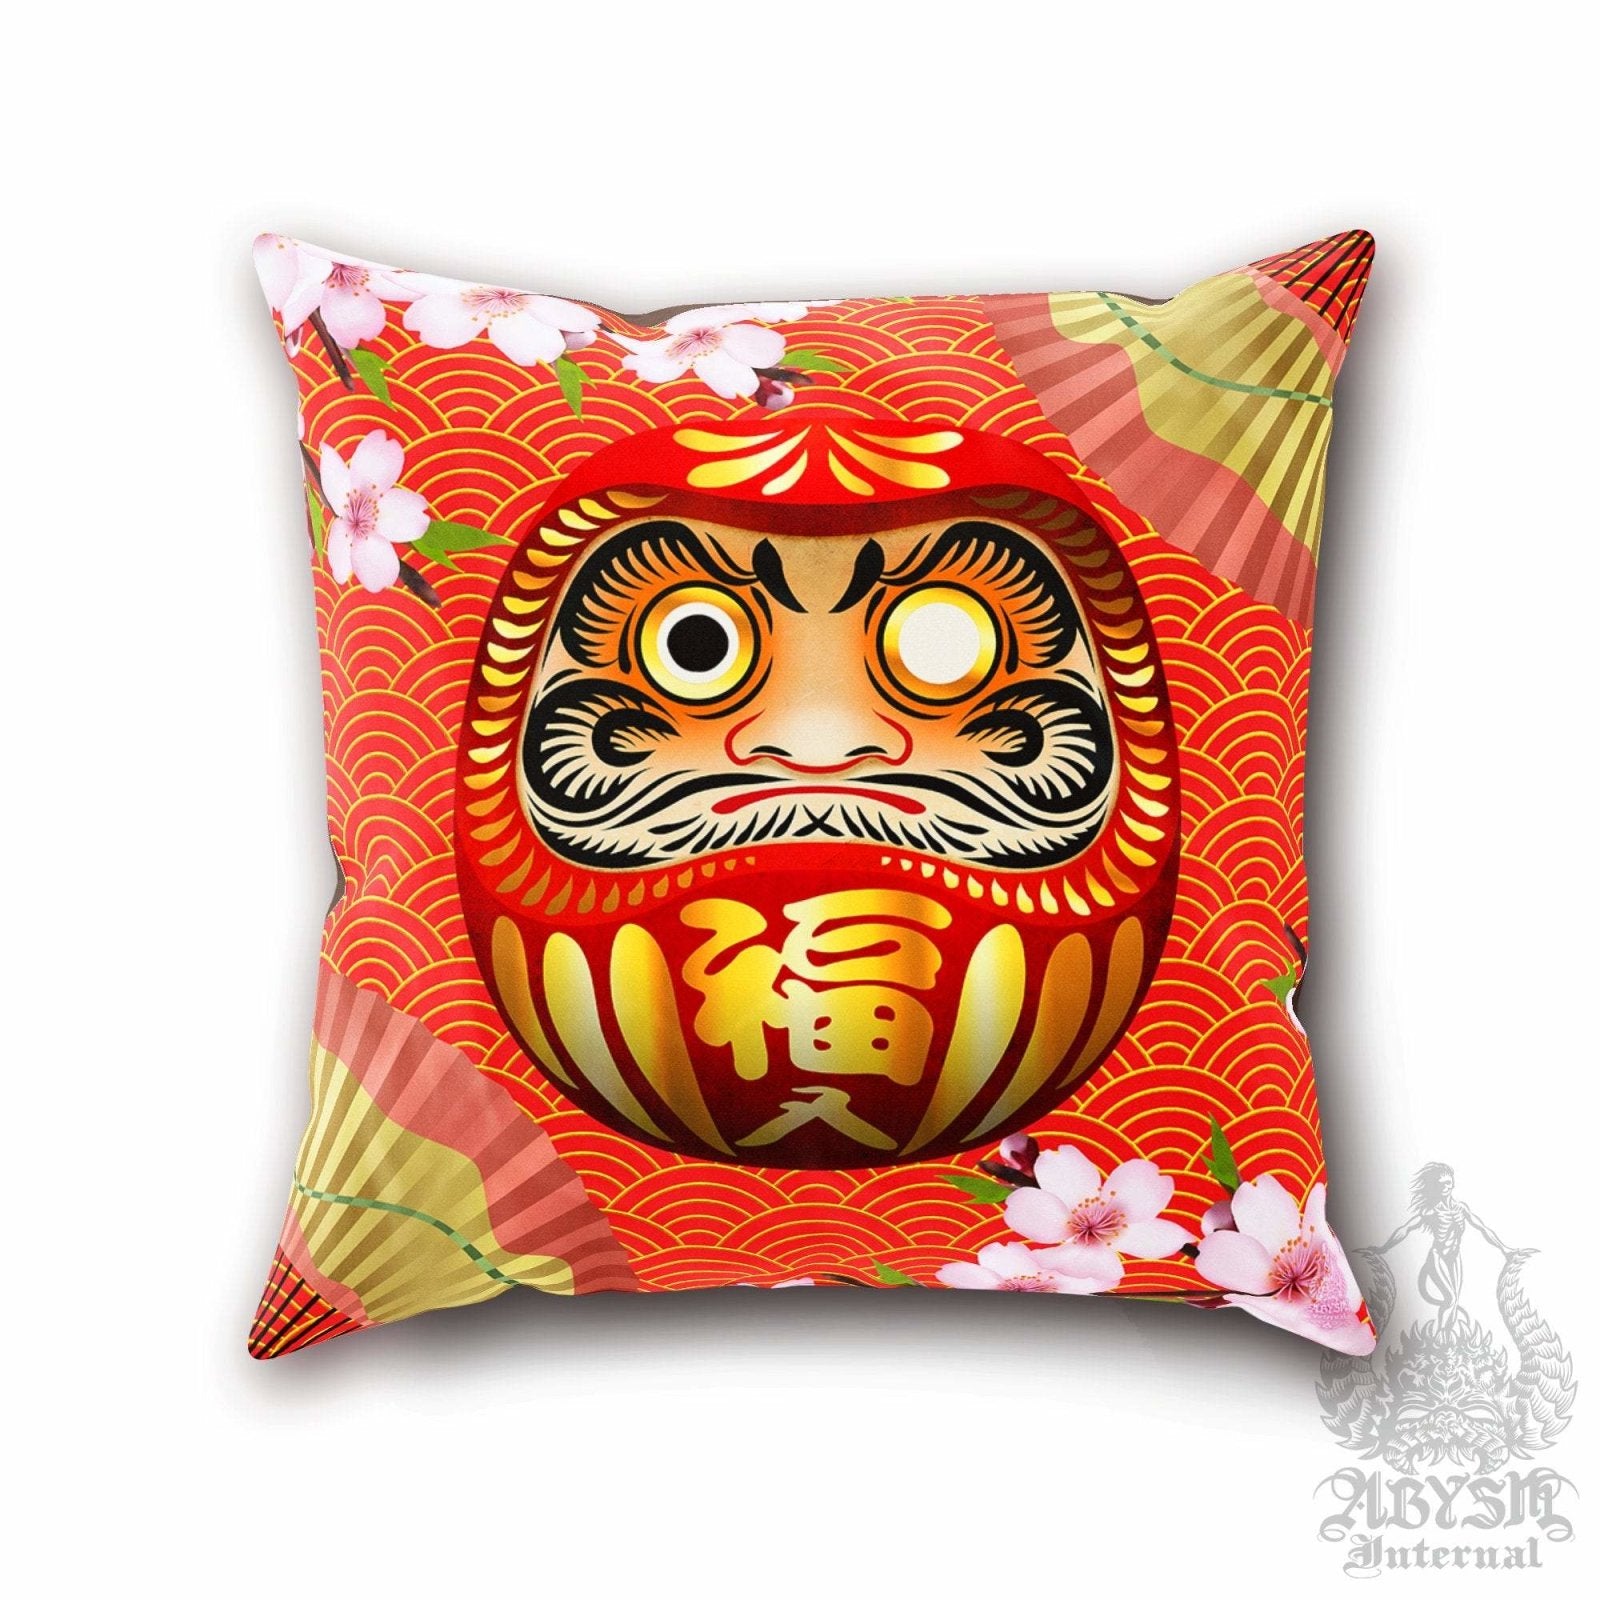 Daruma Throw Pillow, Decorative Accent Cushion, Japanese Room Decor, Funky and Eclectic Home - Red - Abysm Internal